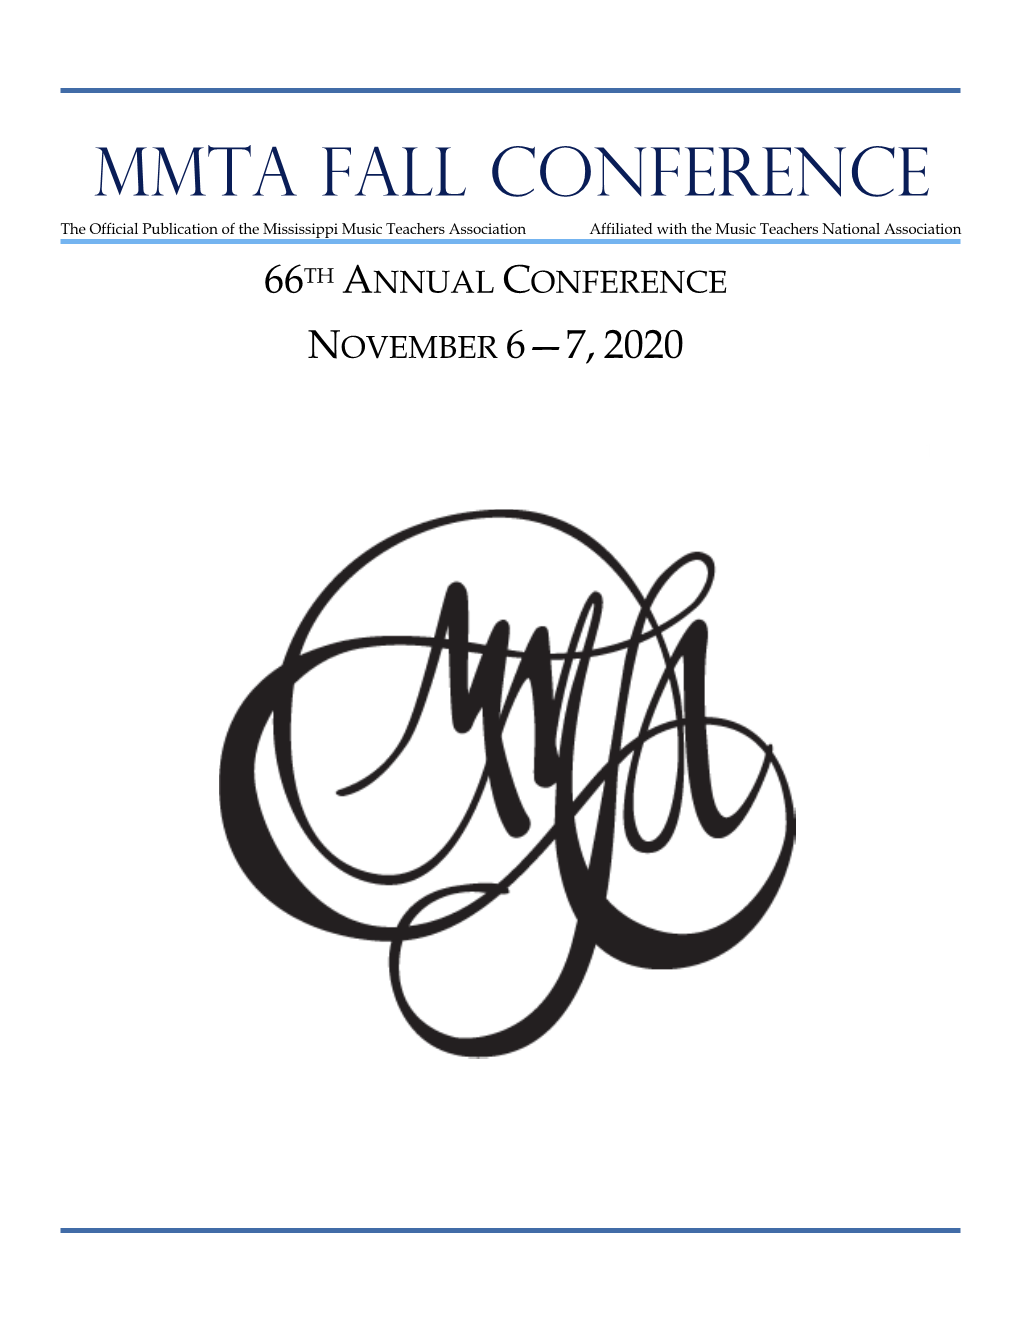 MMTA FALL CONFERENCE the Official Publication of the Mississippi Music Teachers Association Affiliated with the Music Teachers National Association